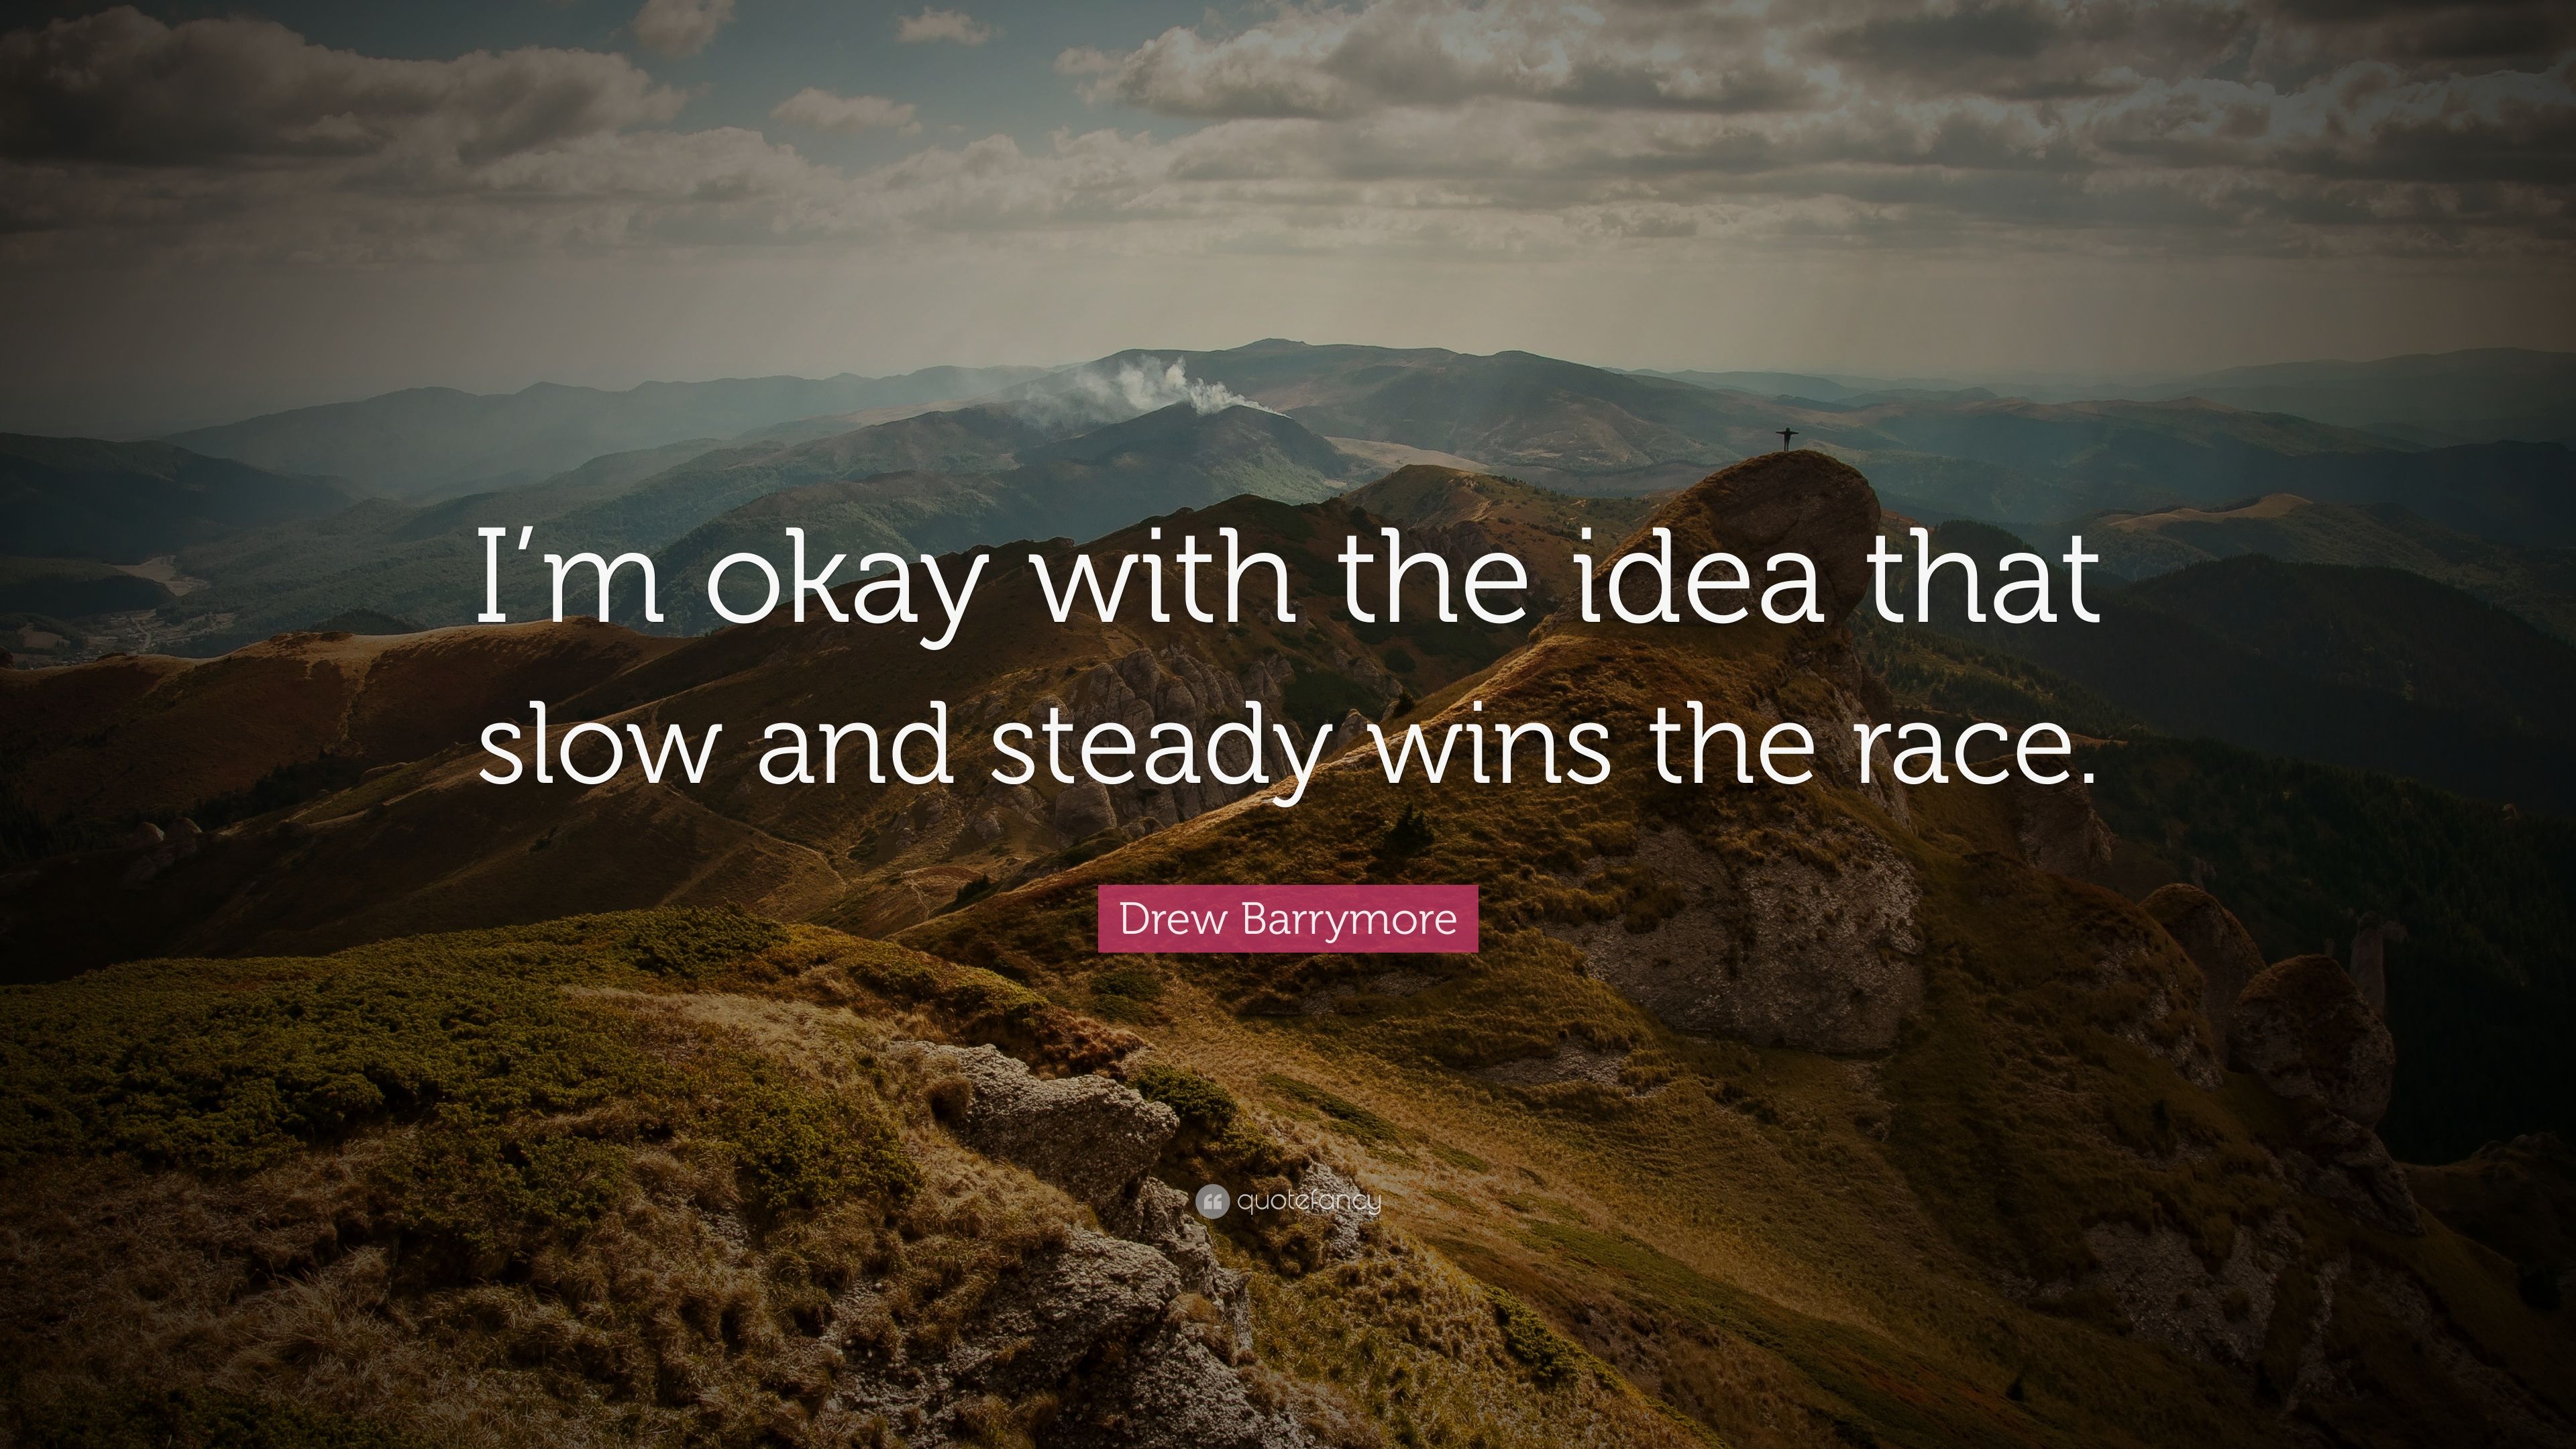 Drew Barrymore Quote: “I'm okay with the idea that slow and steady